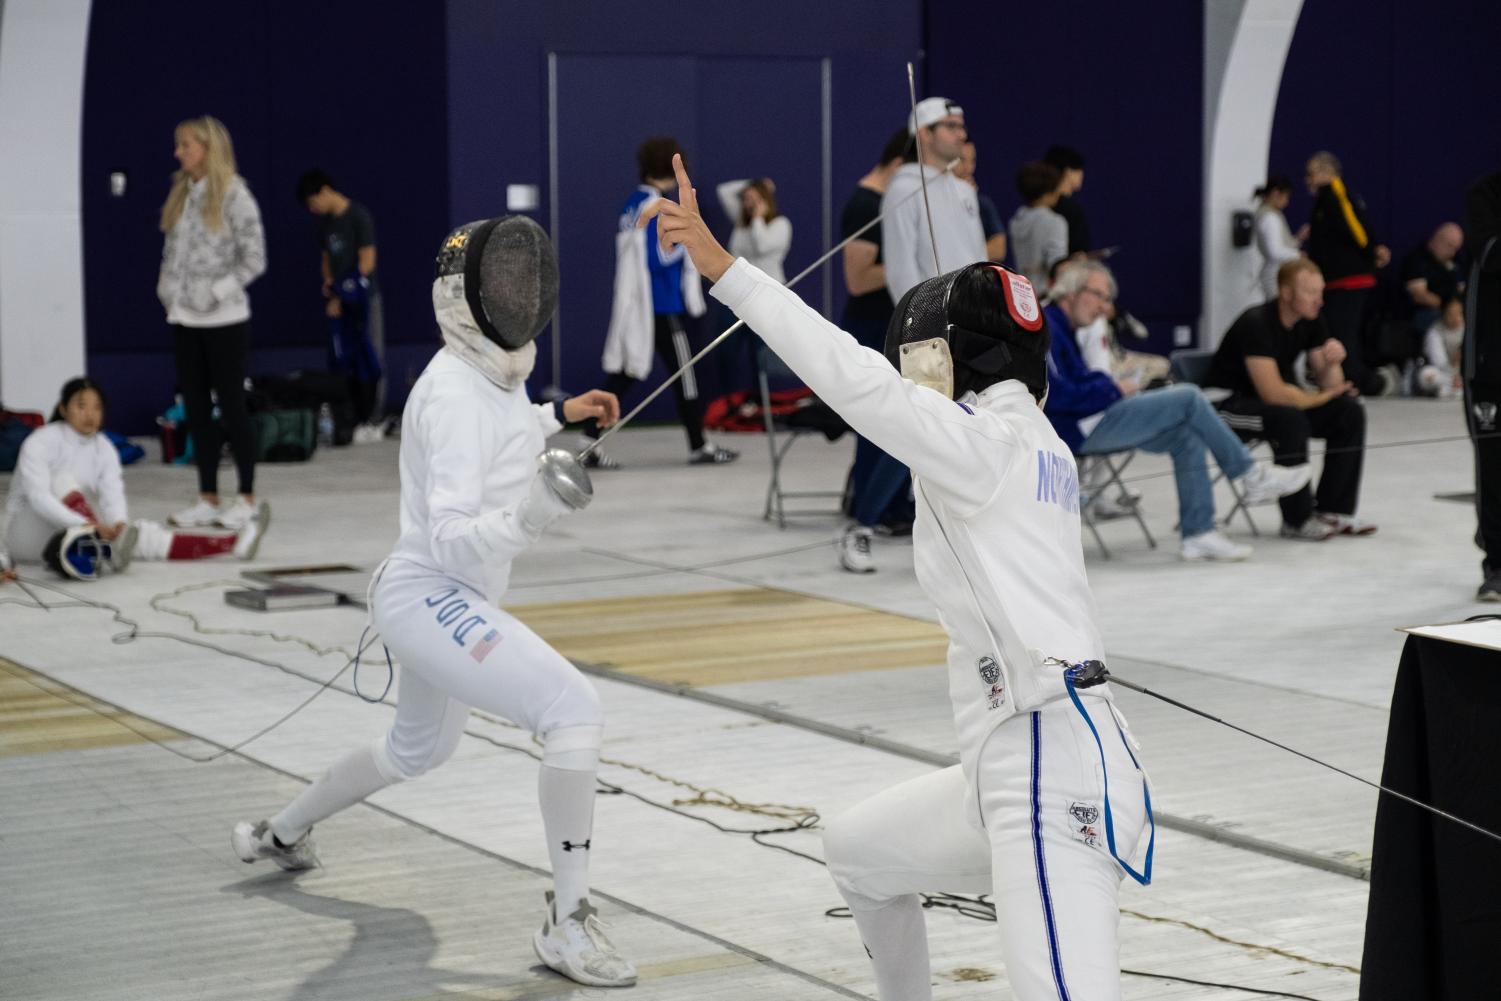 Two fencers move towards each other with weapons raised.